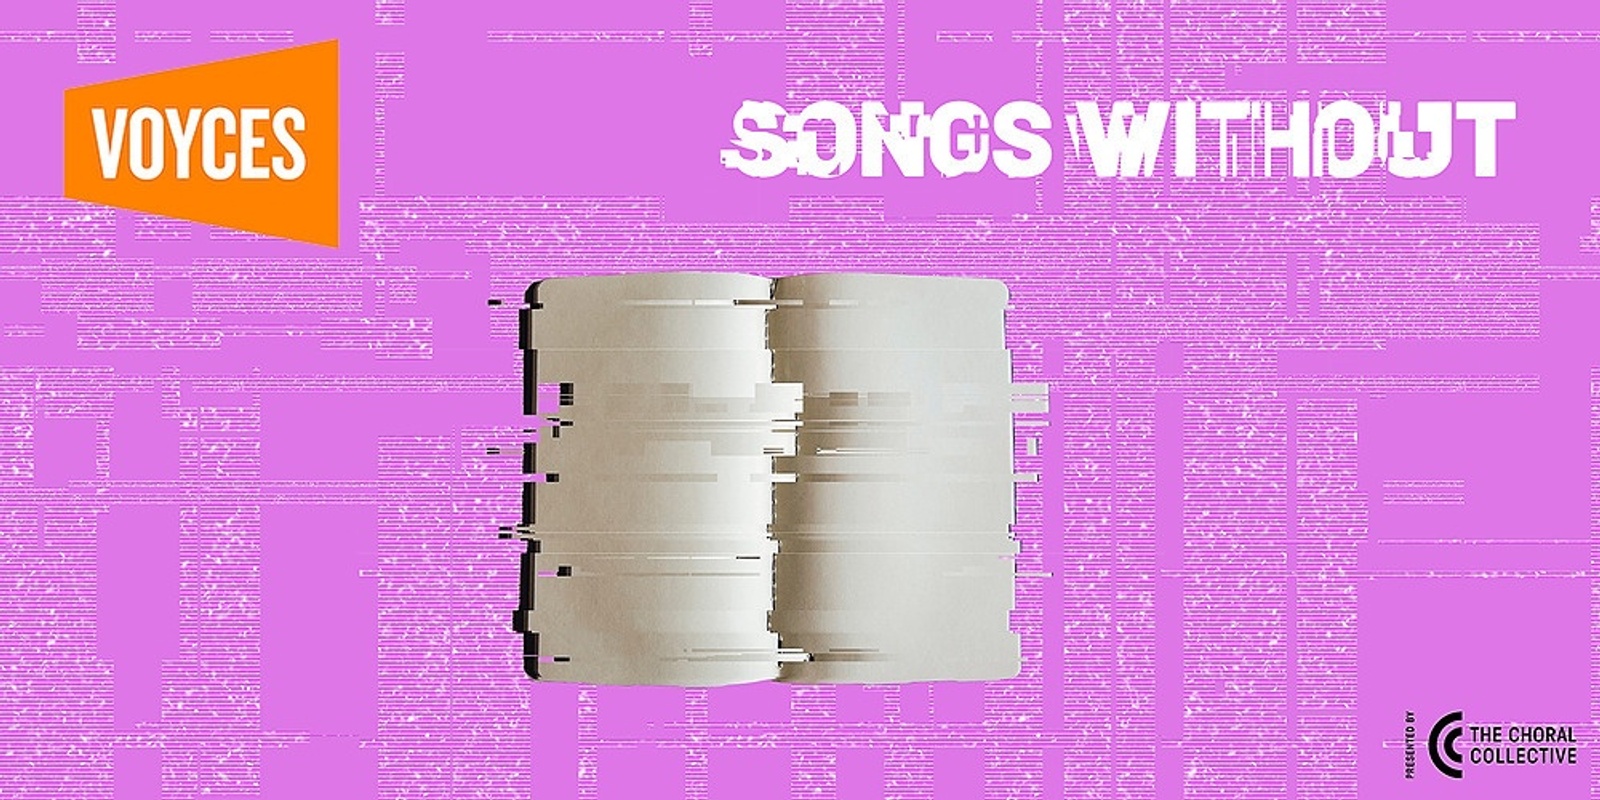 Banner image for Songs Without